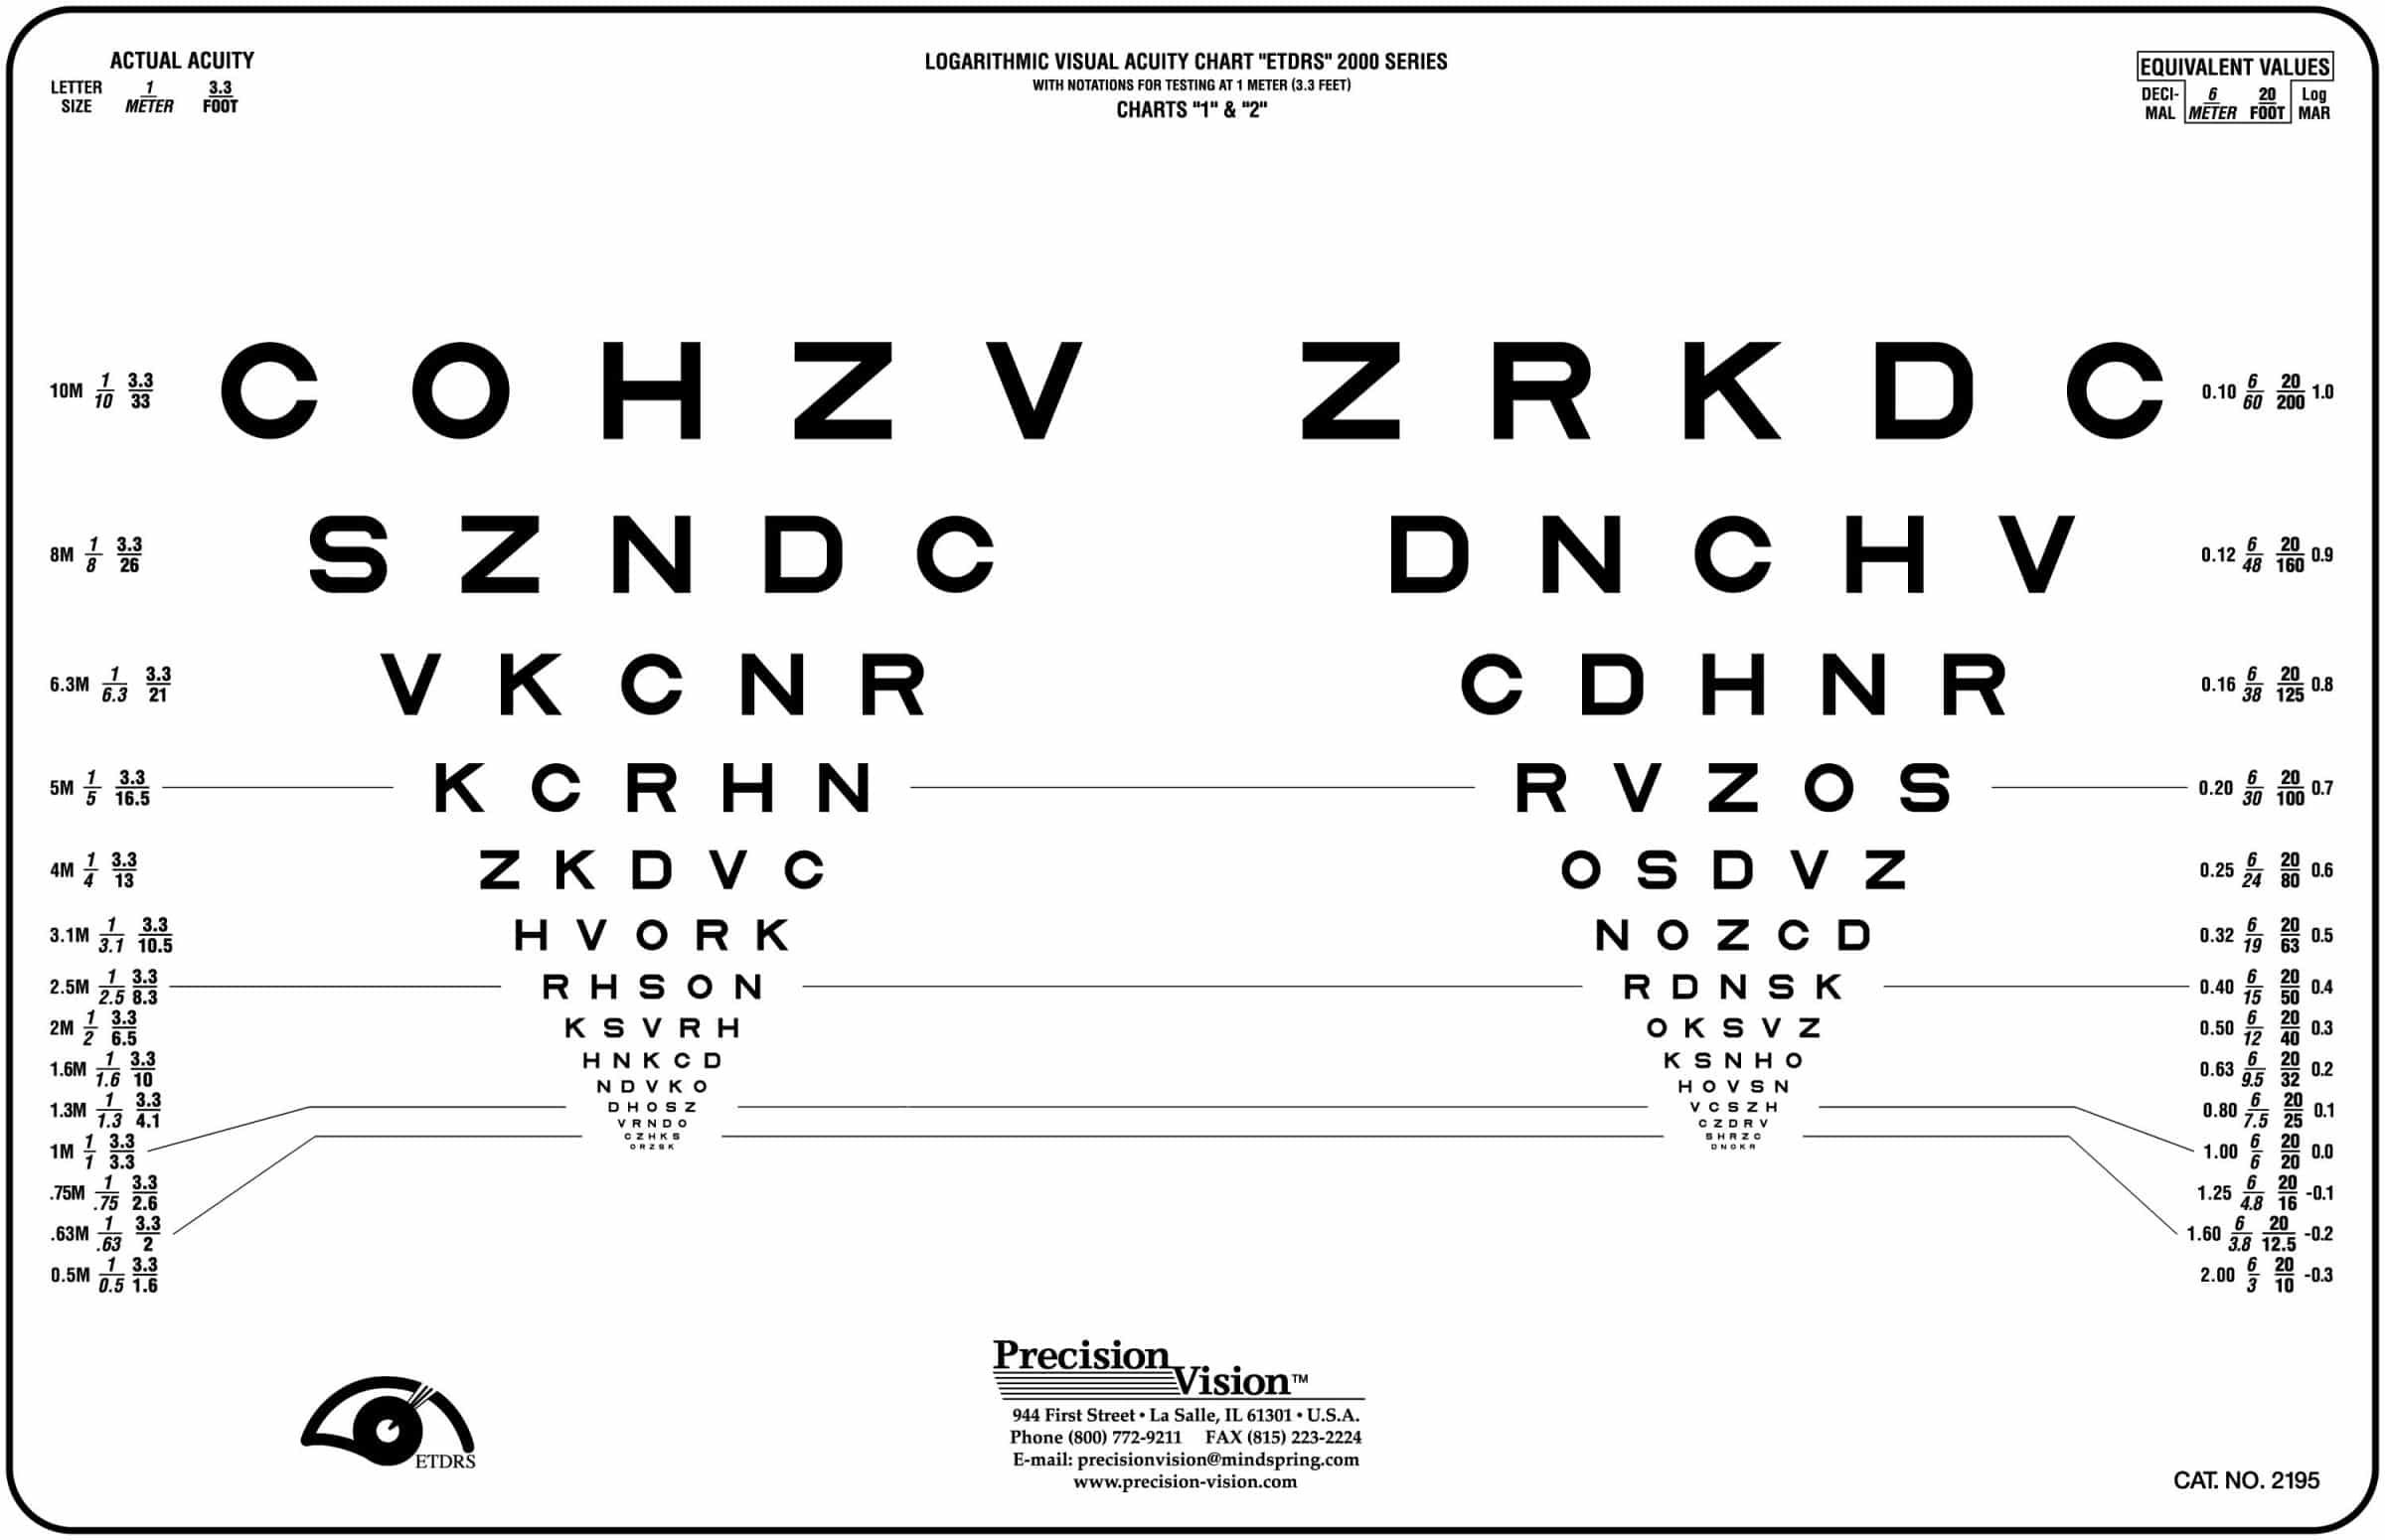 Vision Acuity Chart